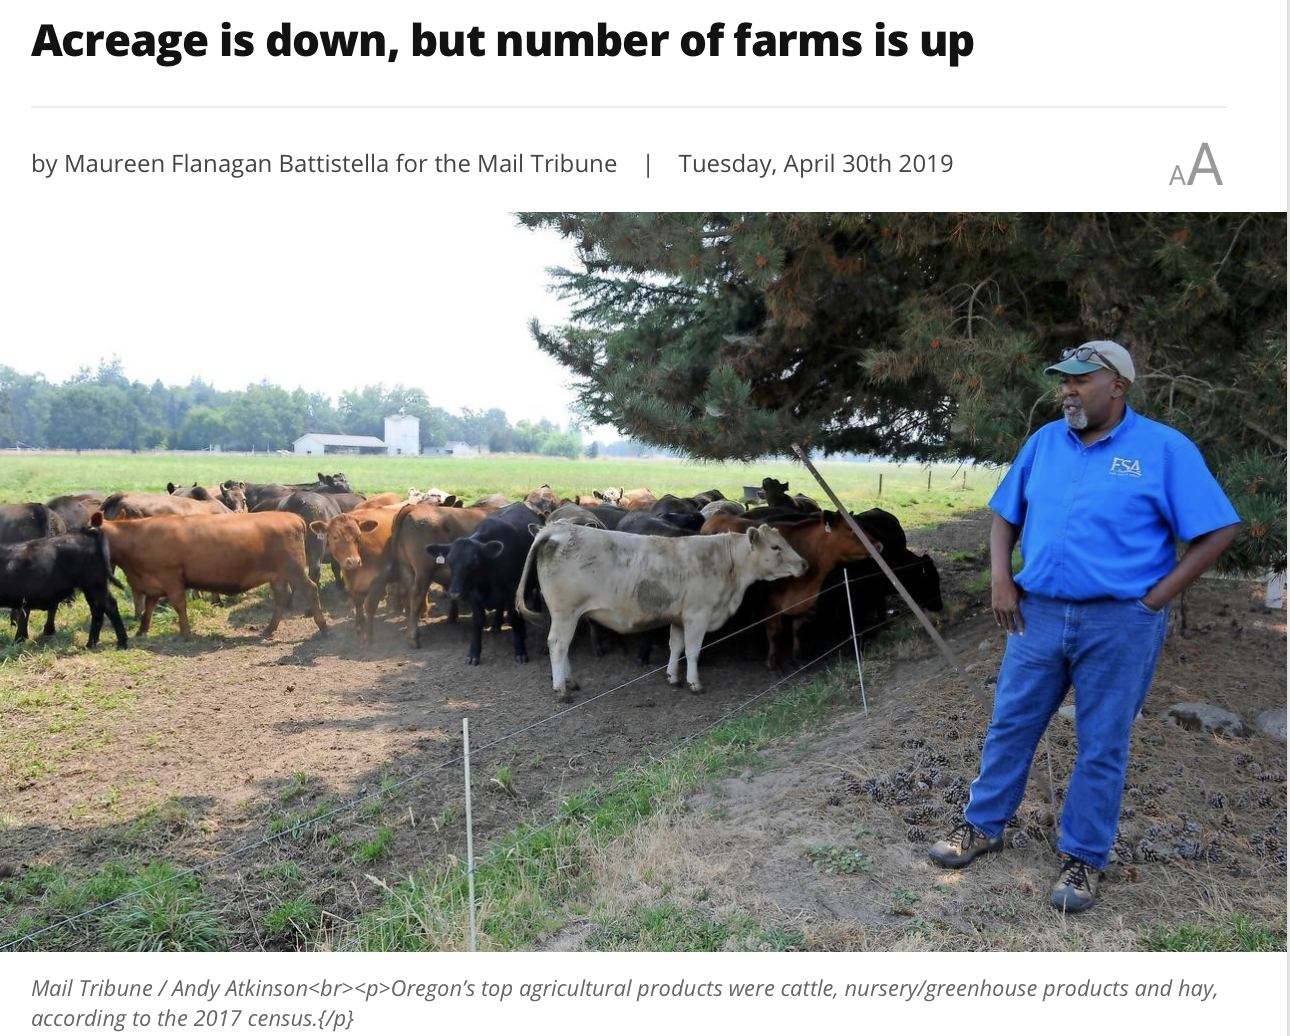 Acreage is down but number of farms is up